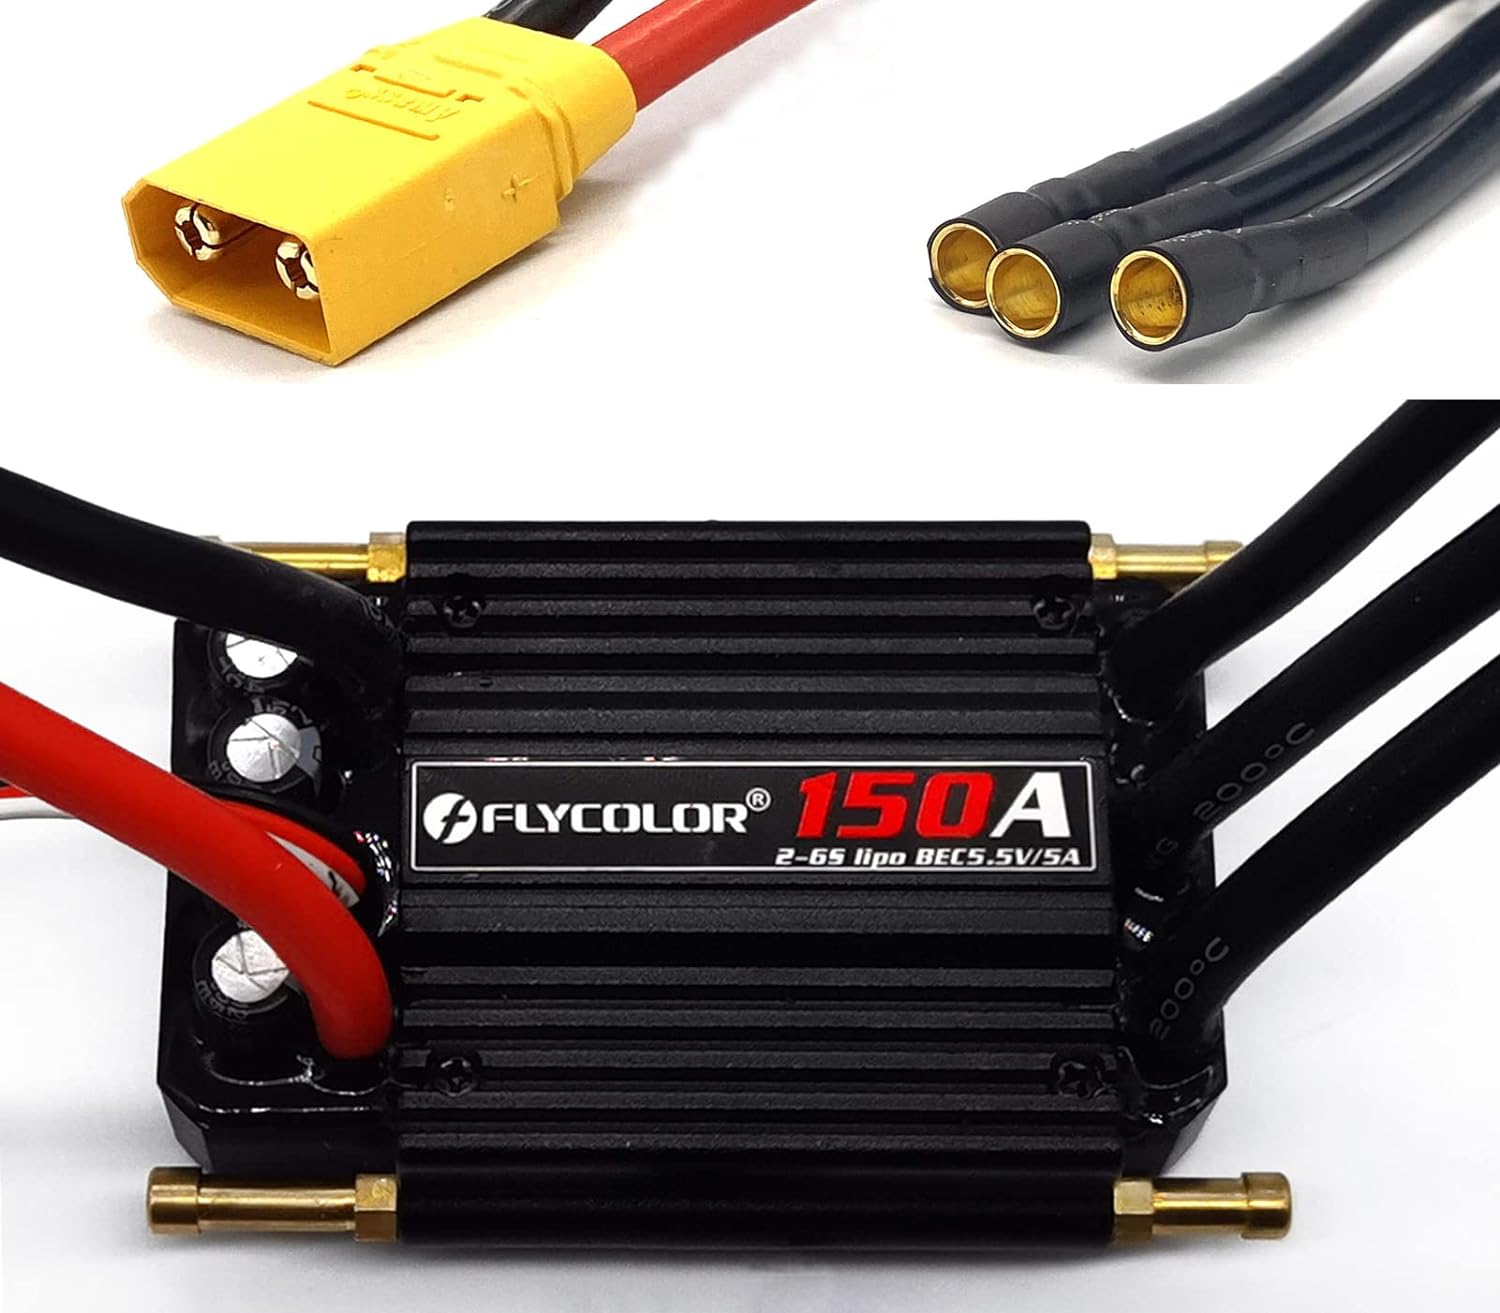 FLYCOLOR 150A ESC for RC Boats – Waterproof Brushless Speed Controller, 2-6S, with 5.5V/5A BEC and XT90 6.0mm Banana Head Connector, Ideal for Model Ships